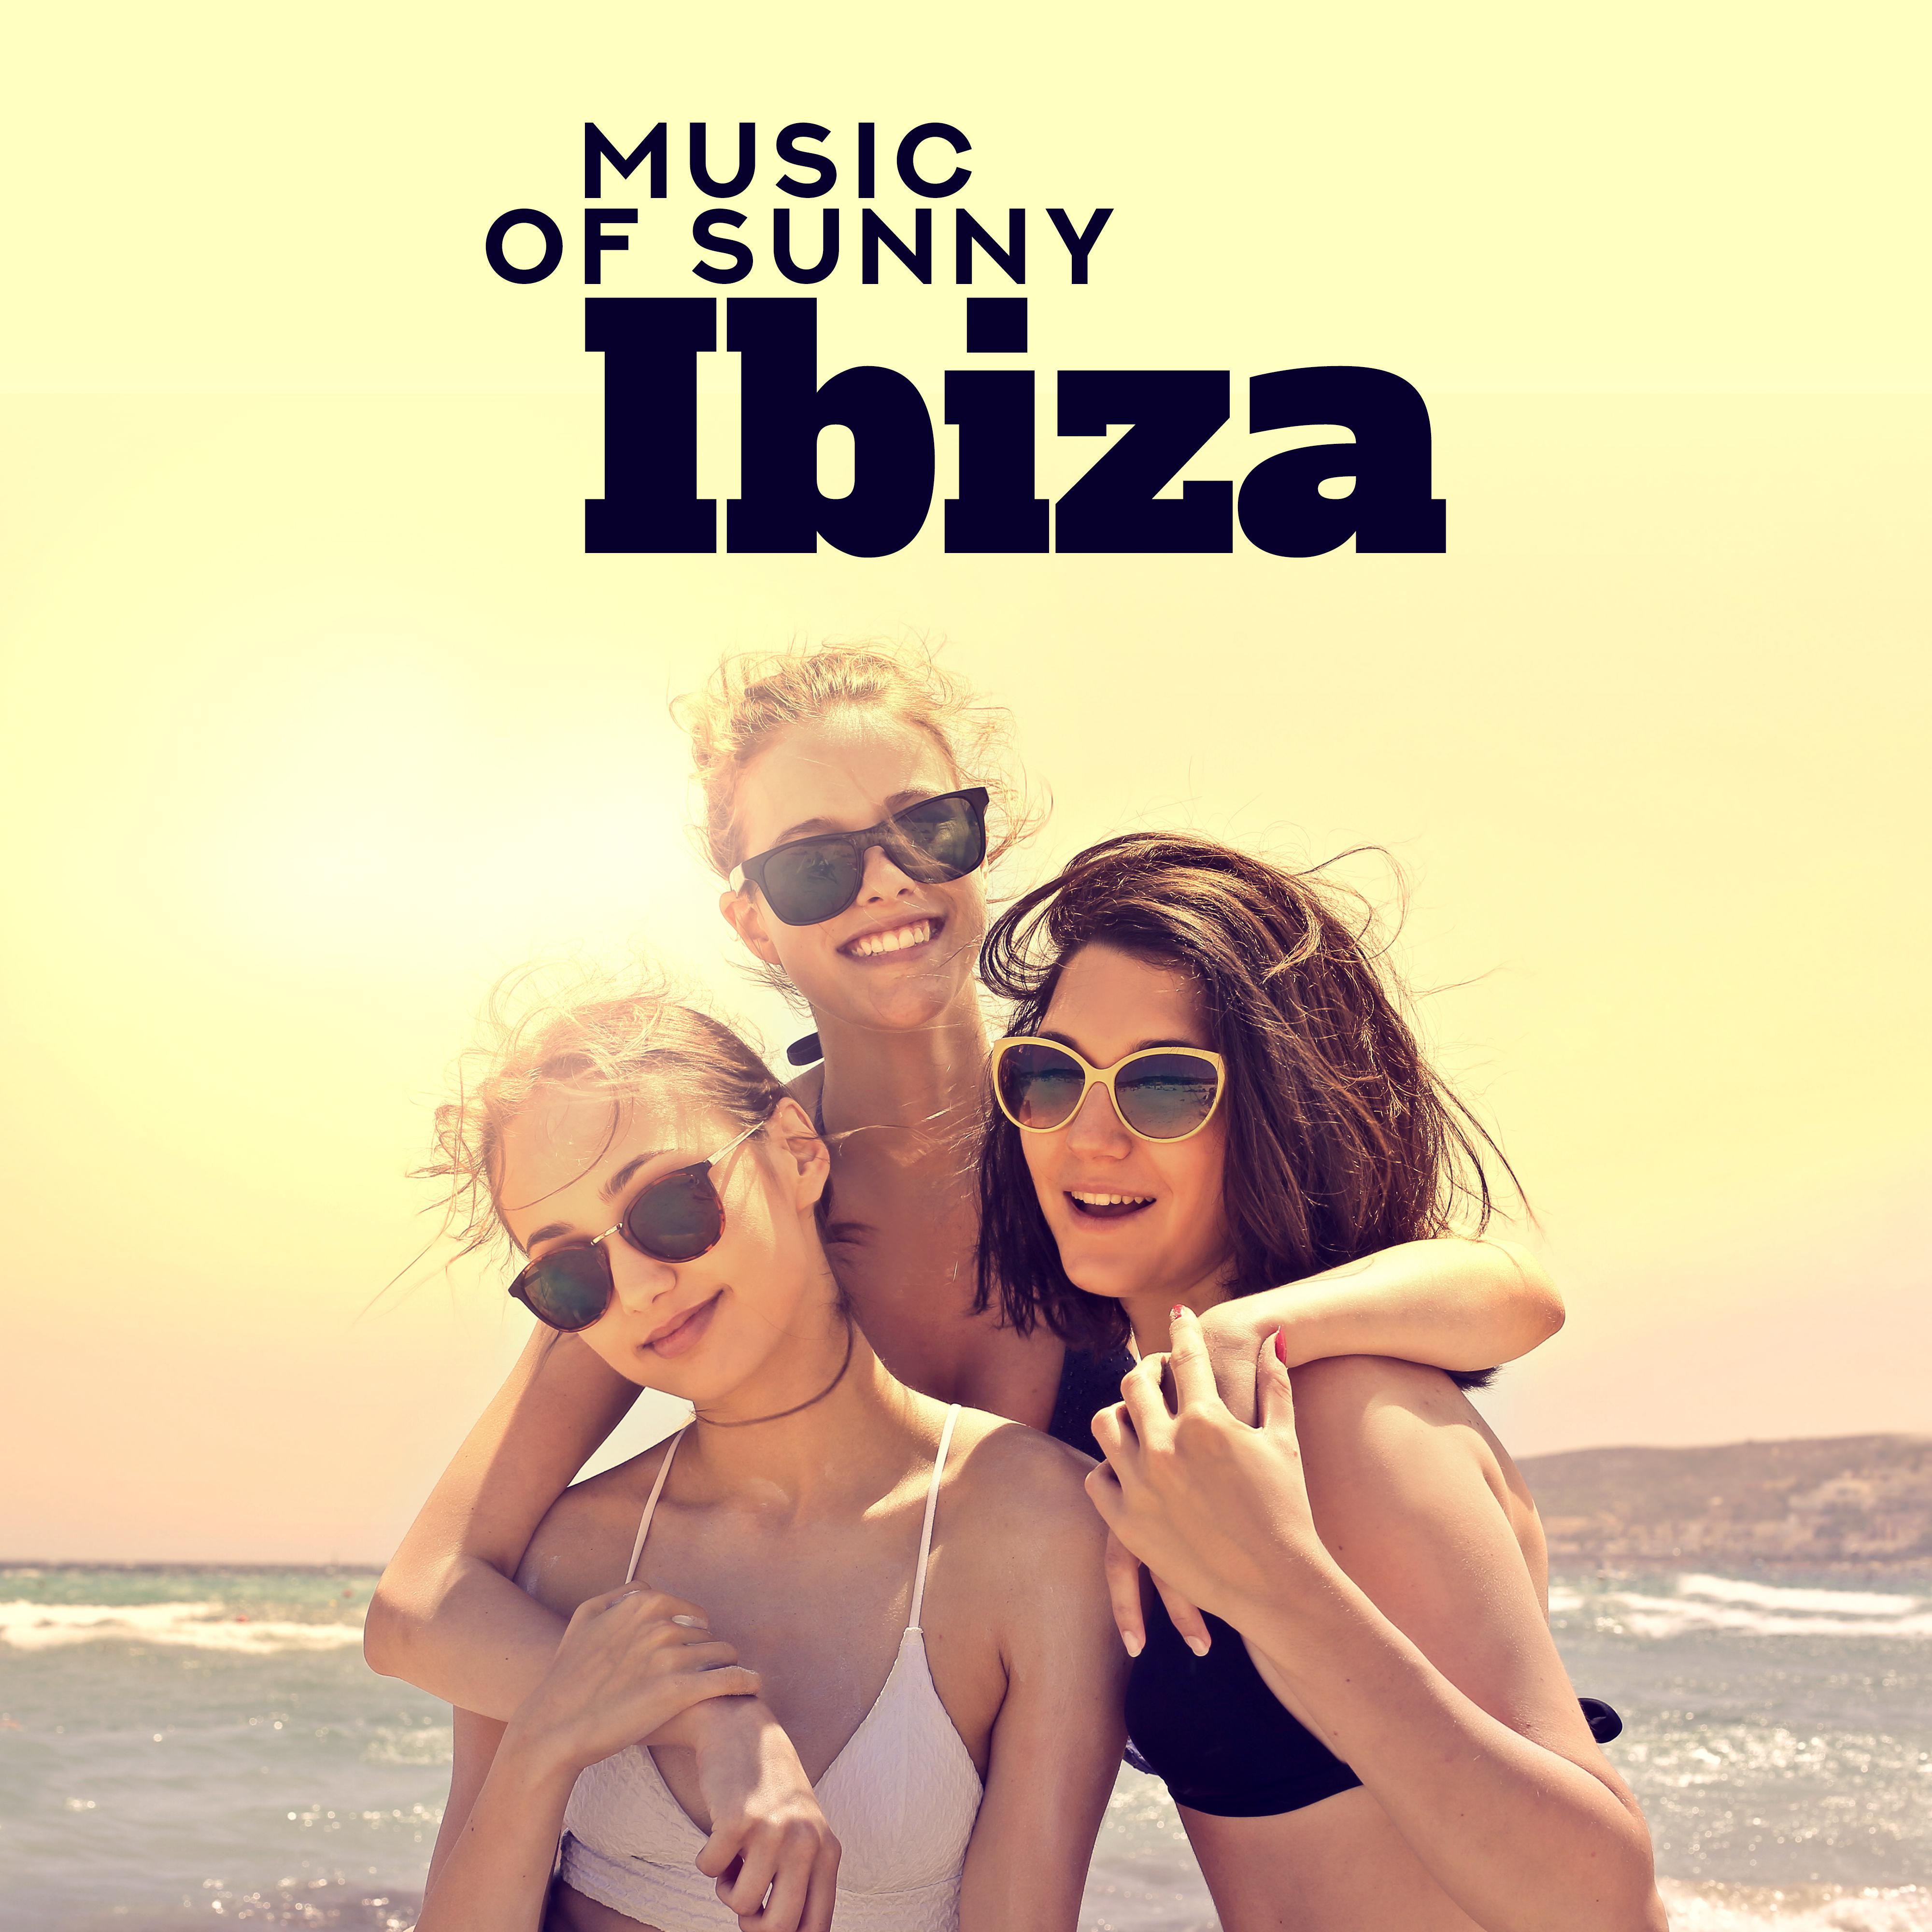 Music of Sunny Ibiza: Summer Lounge Vibes, House Rhythms, Chillout Stereo Waves, Club Tunes